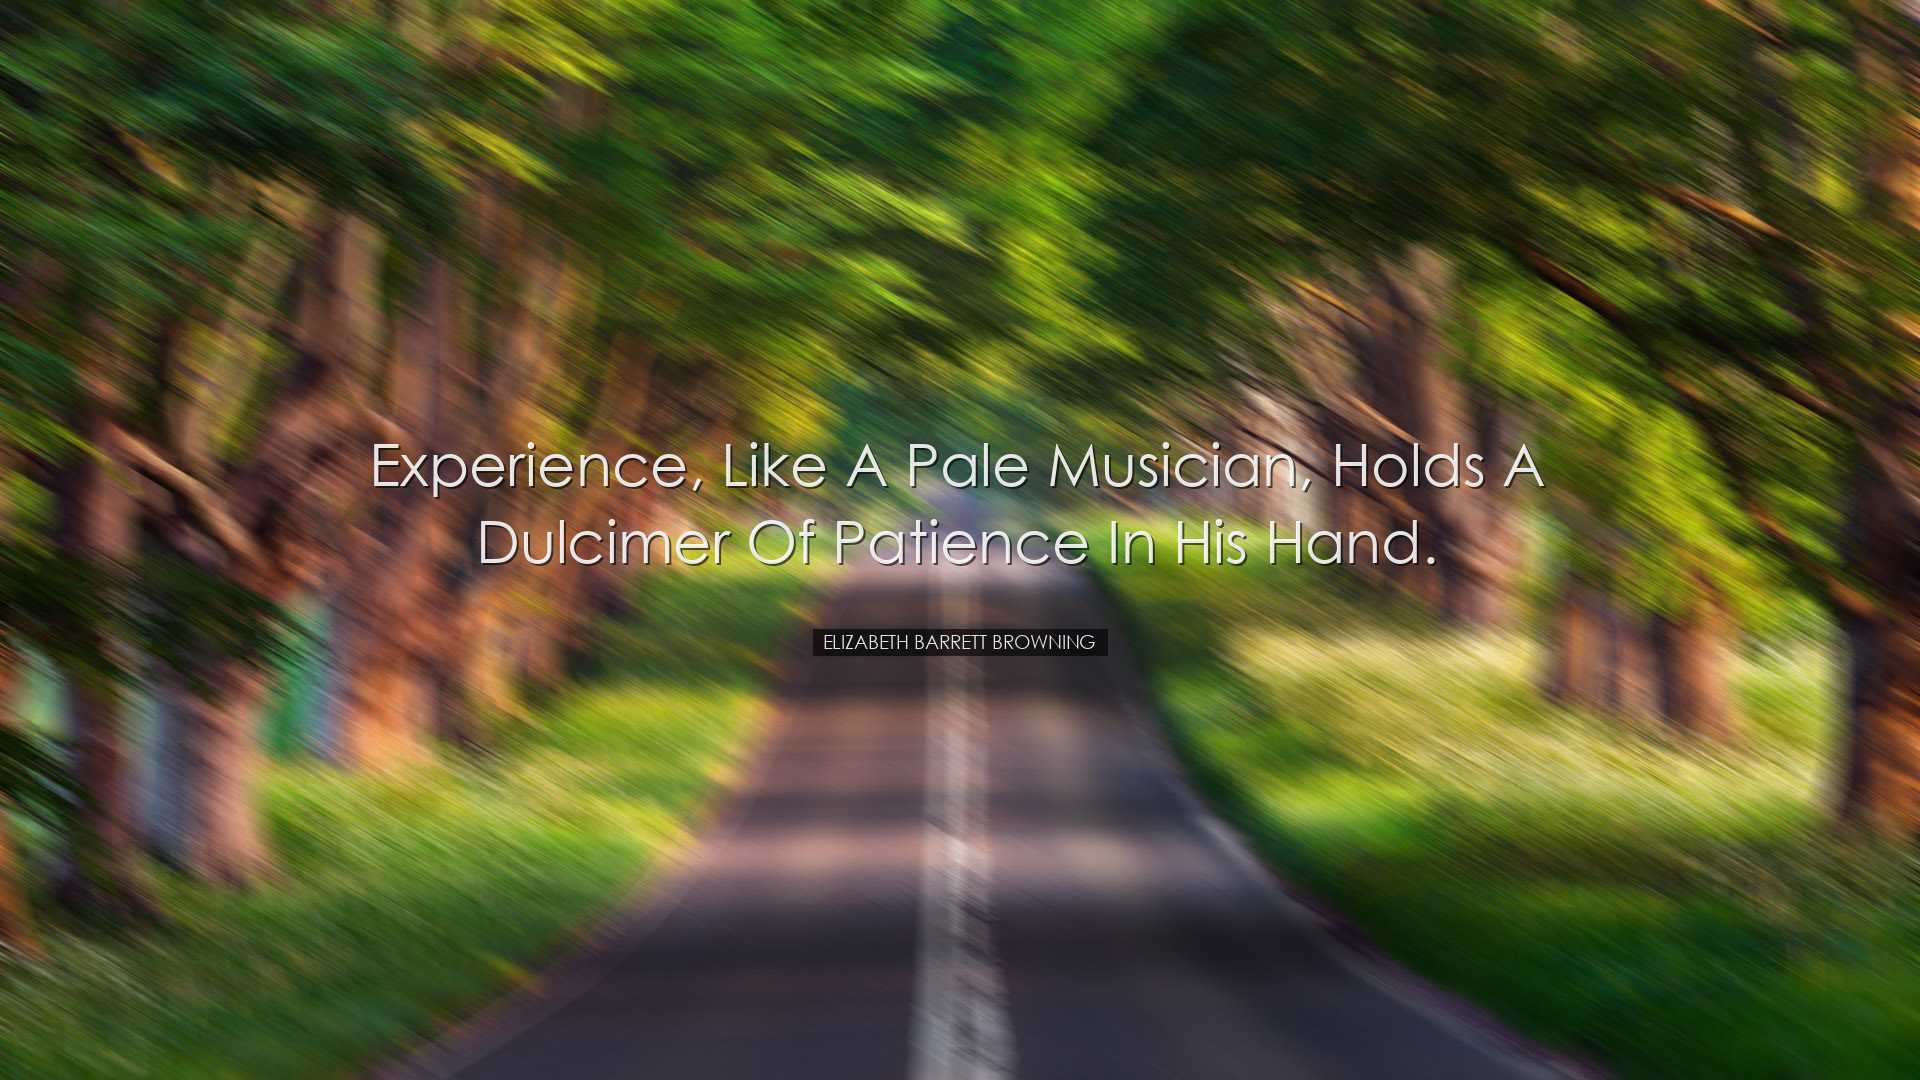 Experience, like a pale musician, holds a dulcimer of patience in